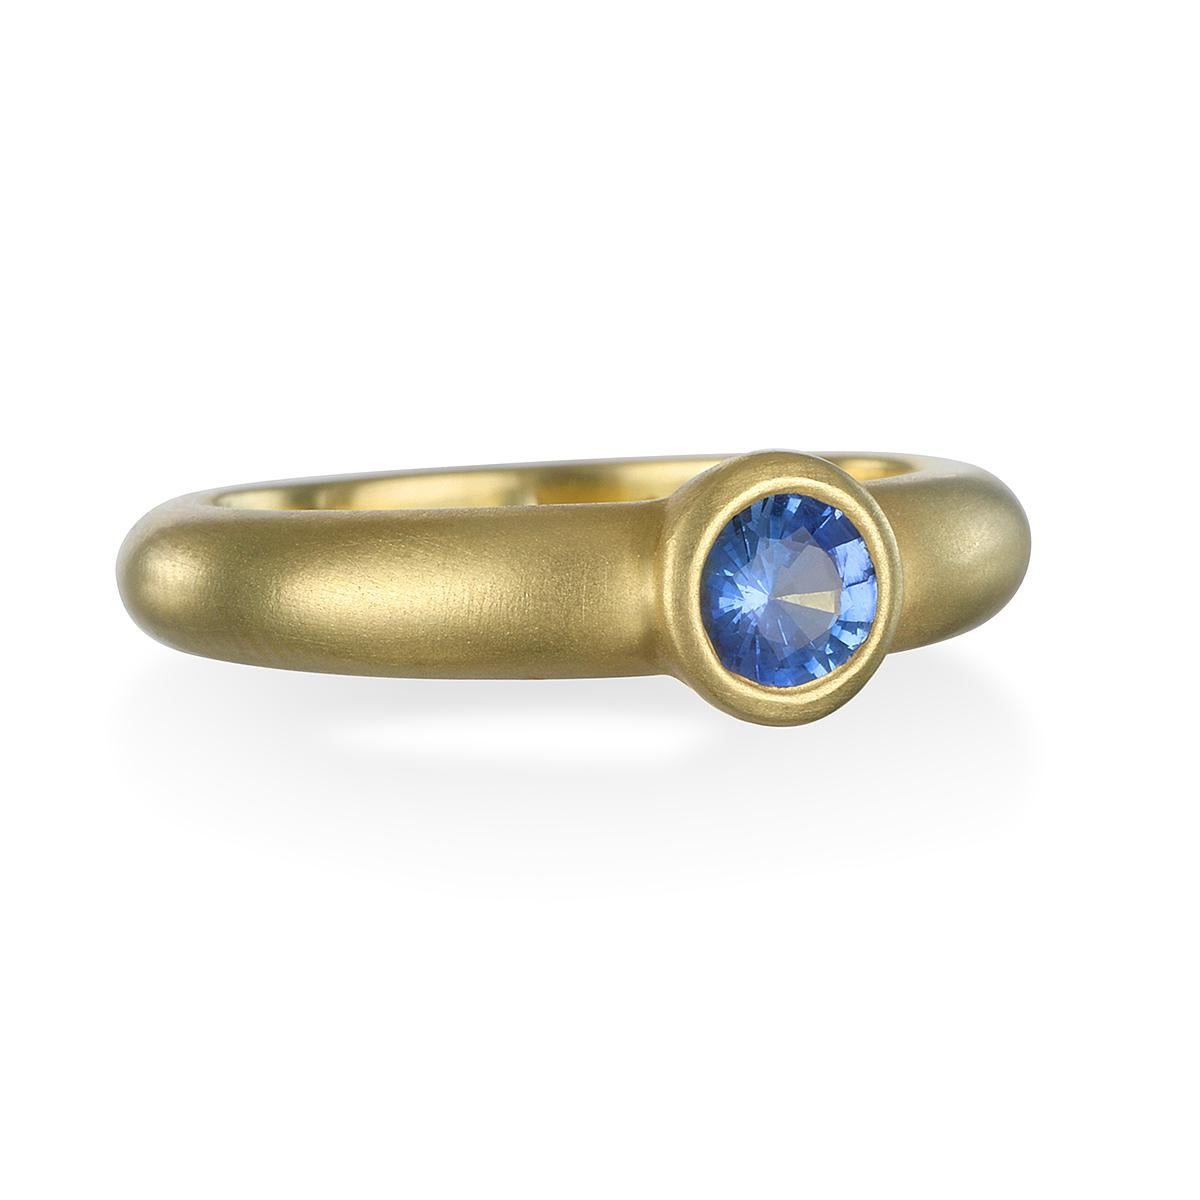 Faye Kim's 18 Karat Gold Blue Ceylon Sapphire Bezel Ring blends beauty and simplicity. Deep blue round sapphire is bezel set and matte finished for a contemporary style; wear alone or stack with other rings to create your own unique style.

Ceylon